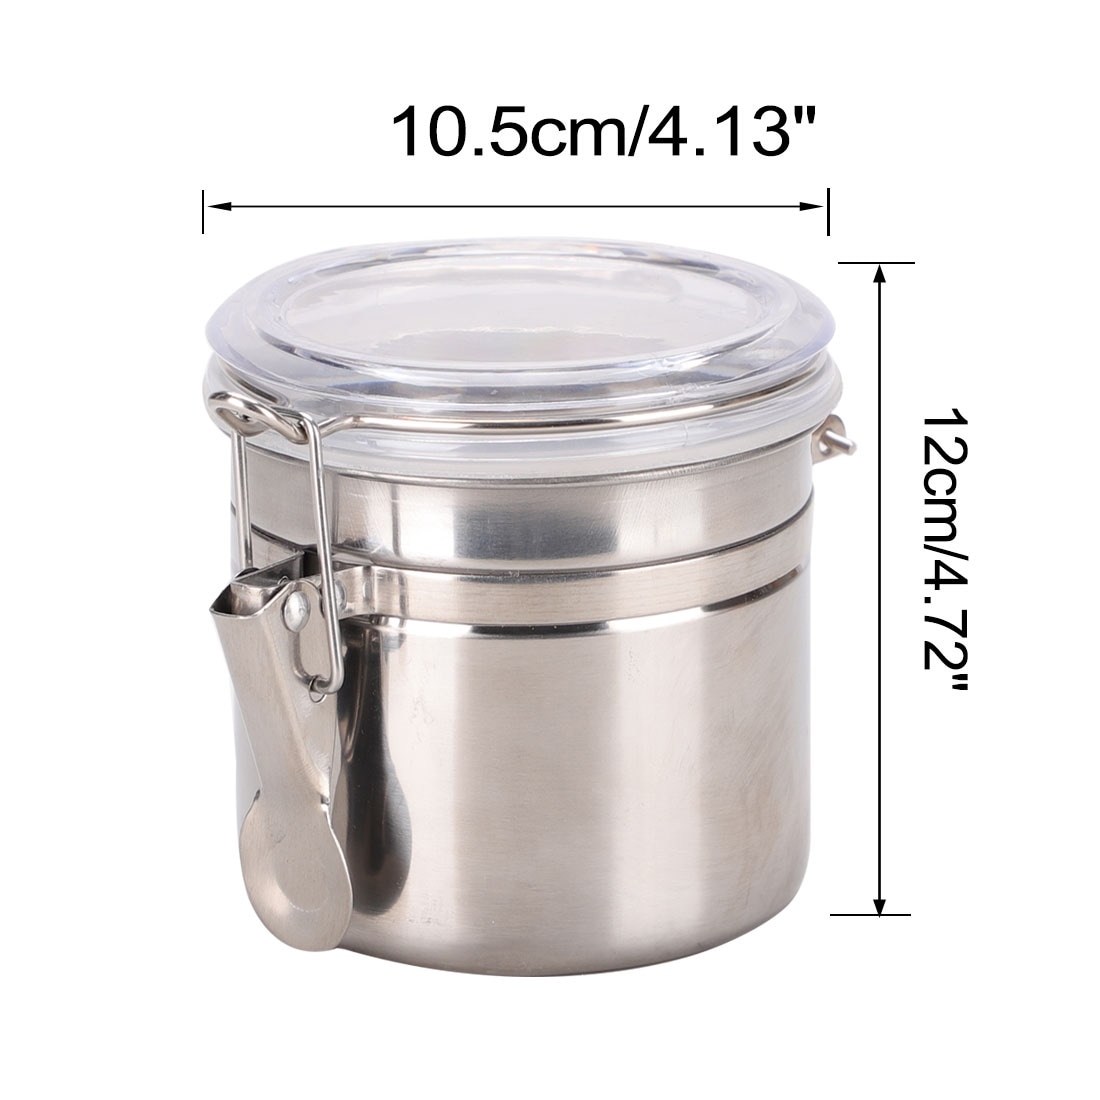 https://ak1.ostkcdn.com/images/products/is/images/direct/dec74ccdea8115dab1b7d79b44e424a3faa2db90/Stainless-Steel-Airtight-Canister-Food-Container.jpg